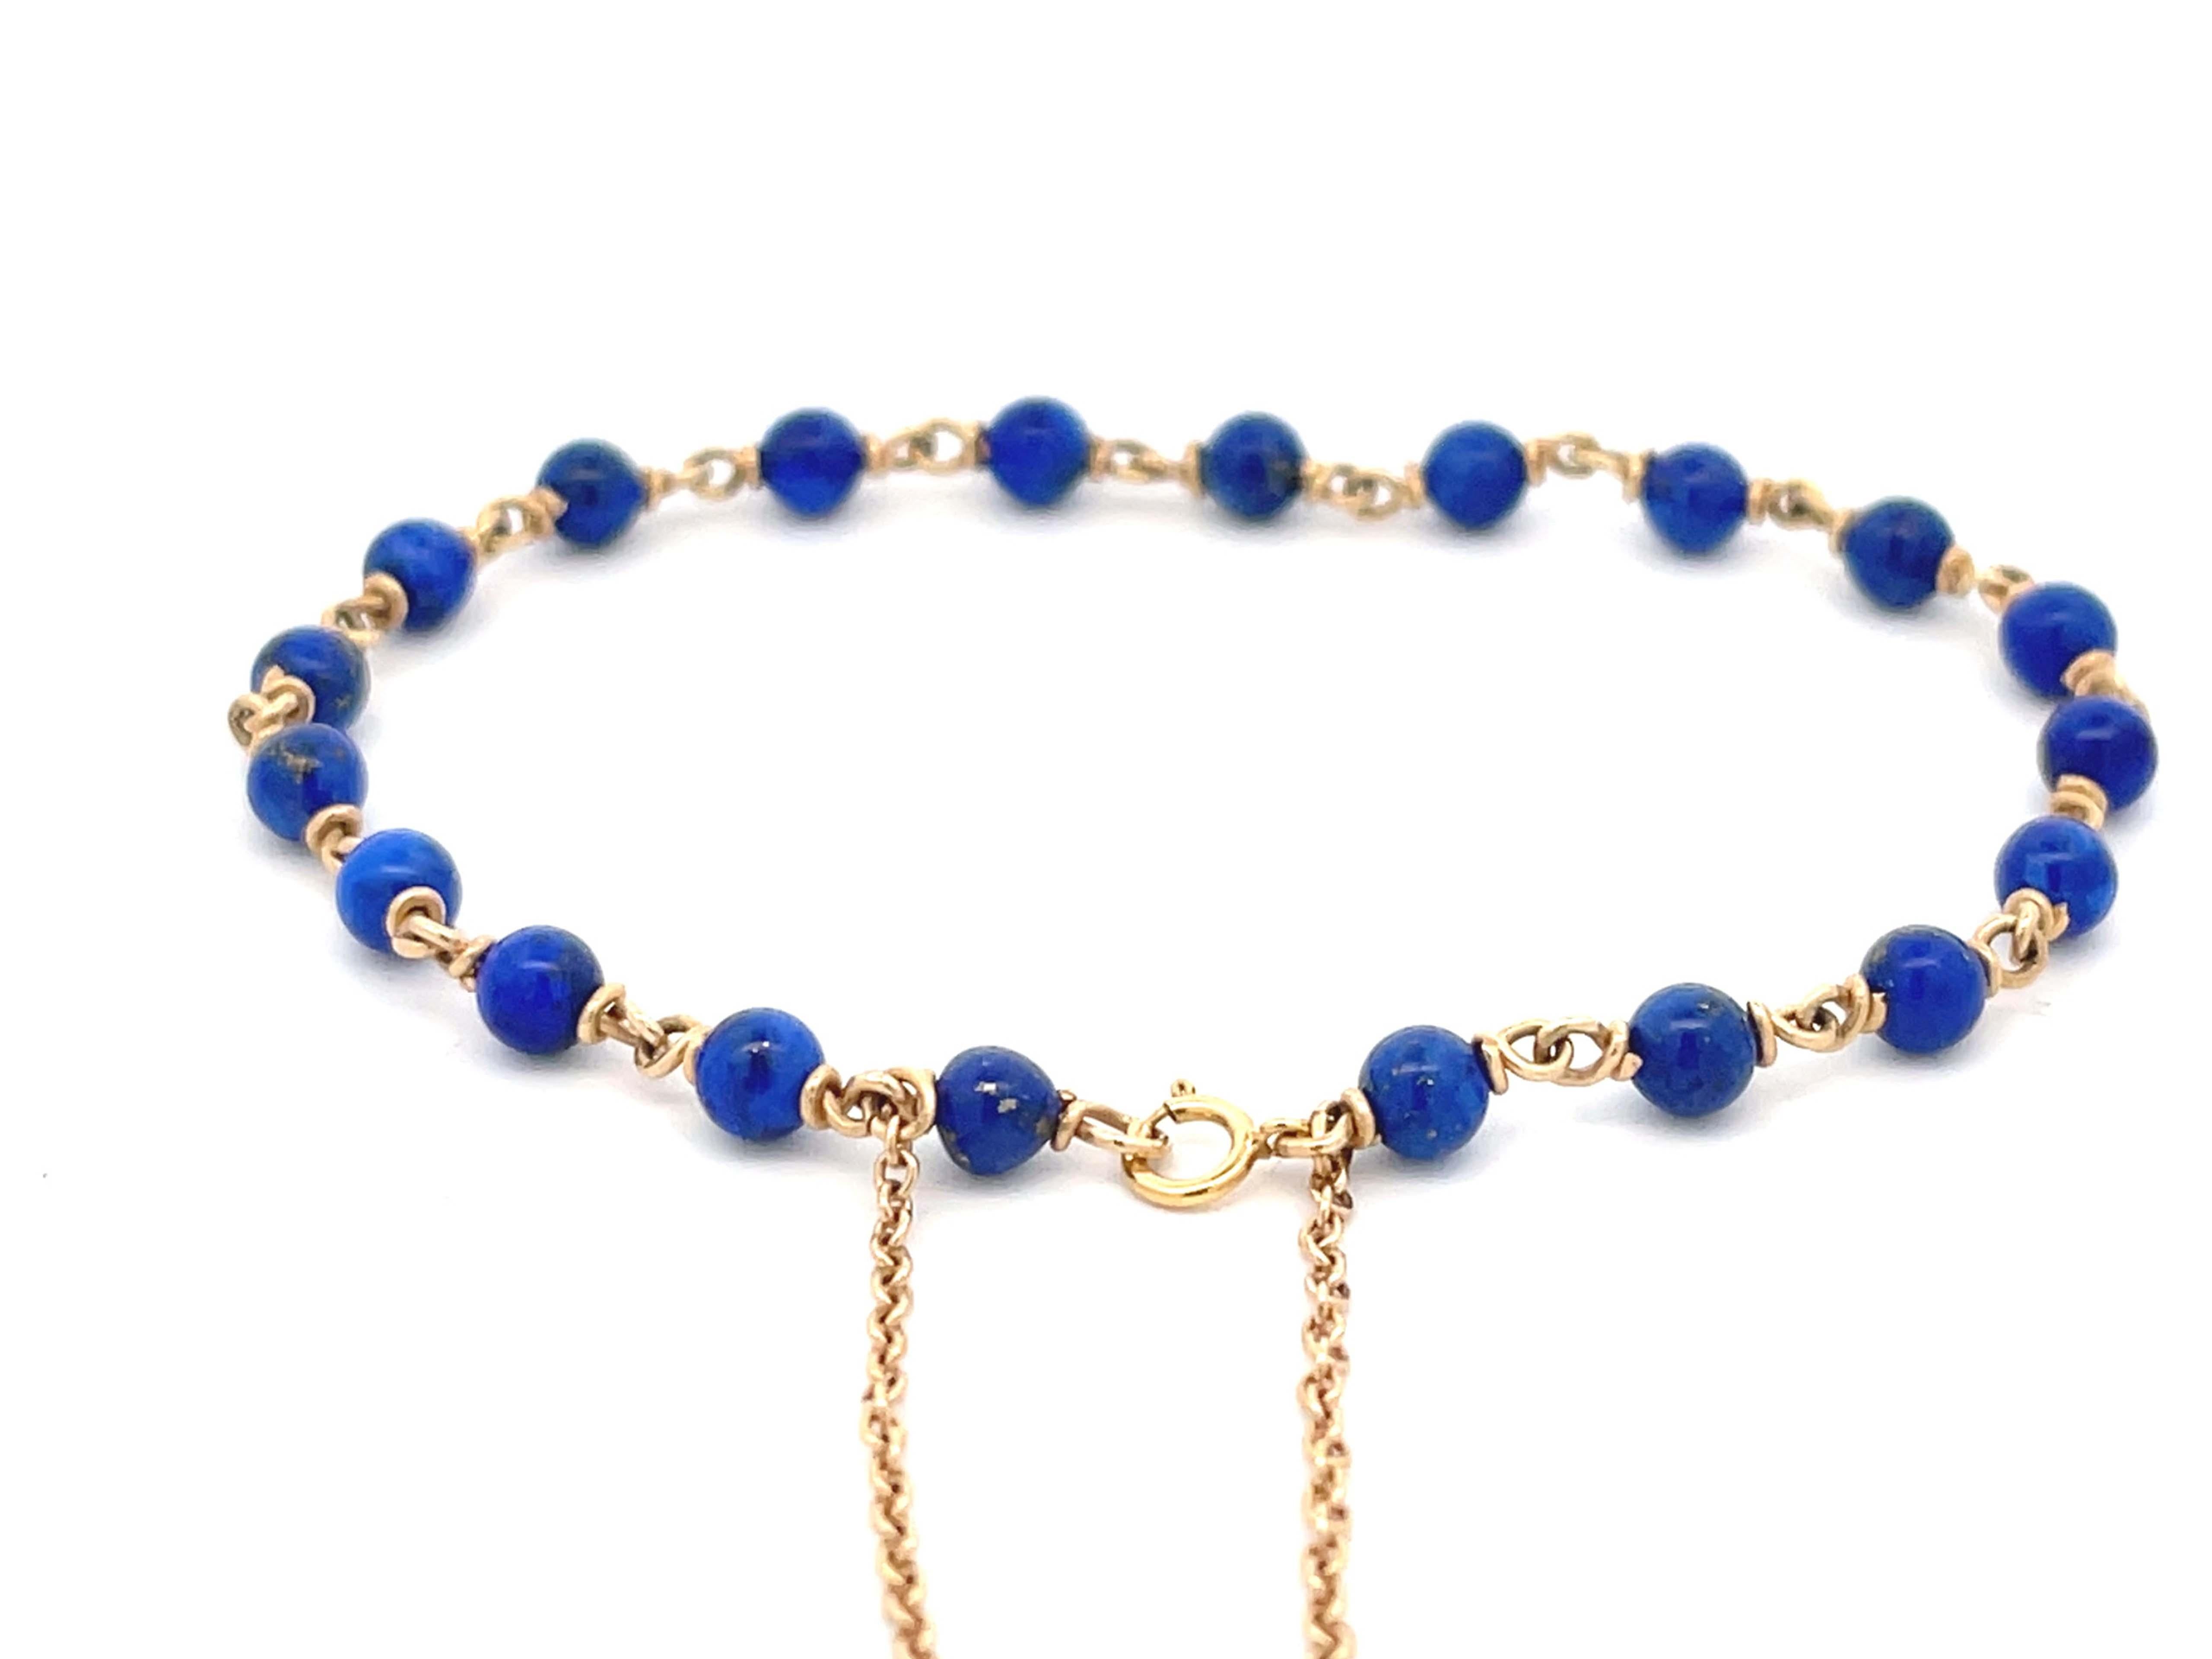 Lapis Lazuli Bracelet in 14k Yellow Gold In Excellent Condition For Sale In Honolulu, HI